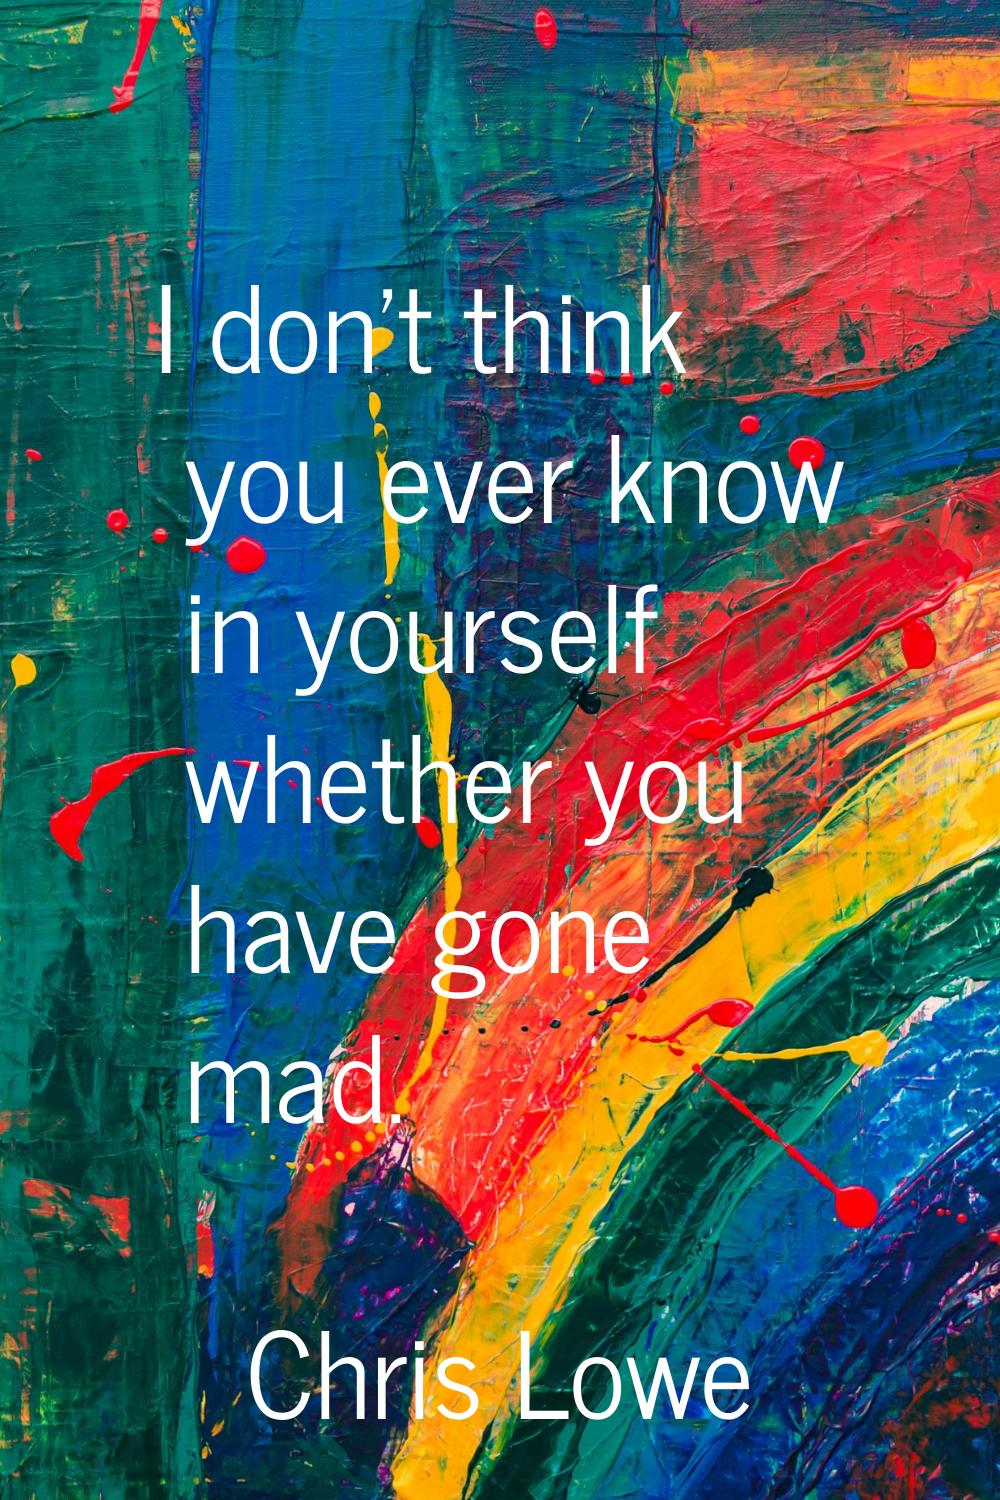 I don't think you ever know in yourself whether you have gone mad.